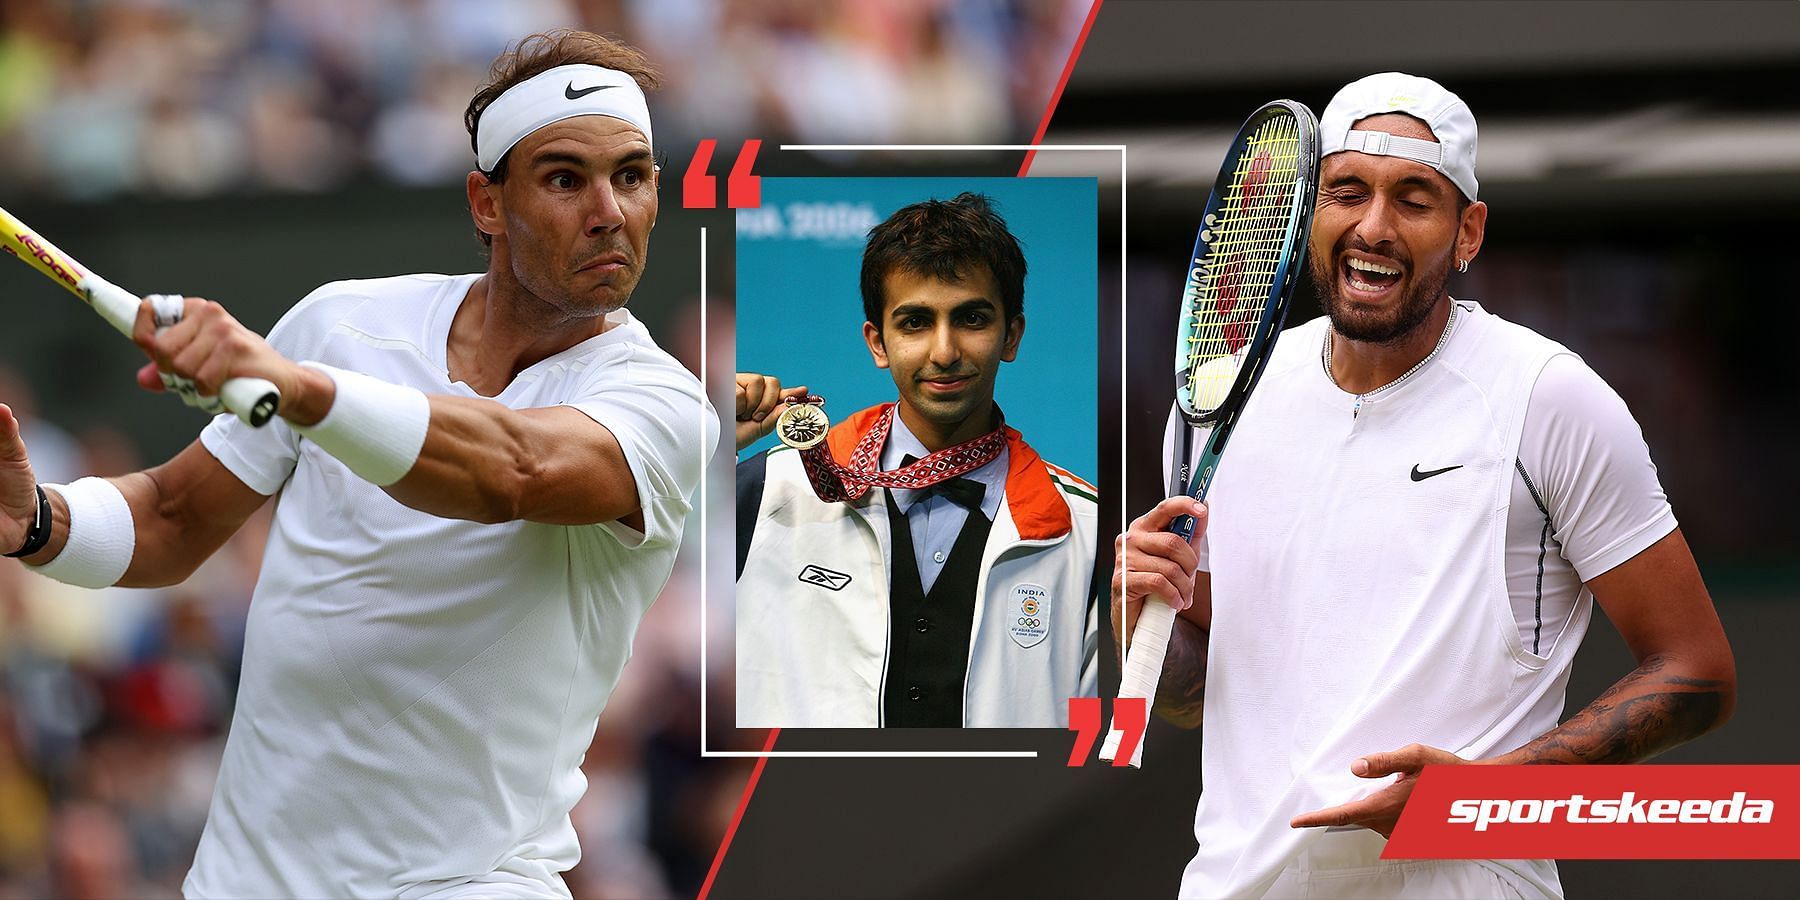 Cueist Pankaj Advani (inset) has given his thoughts on the Nadal-Kyrgios Wimbledon SF clash